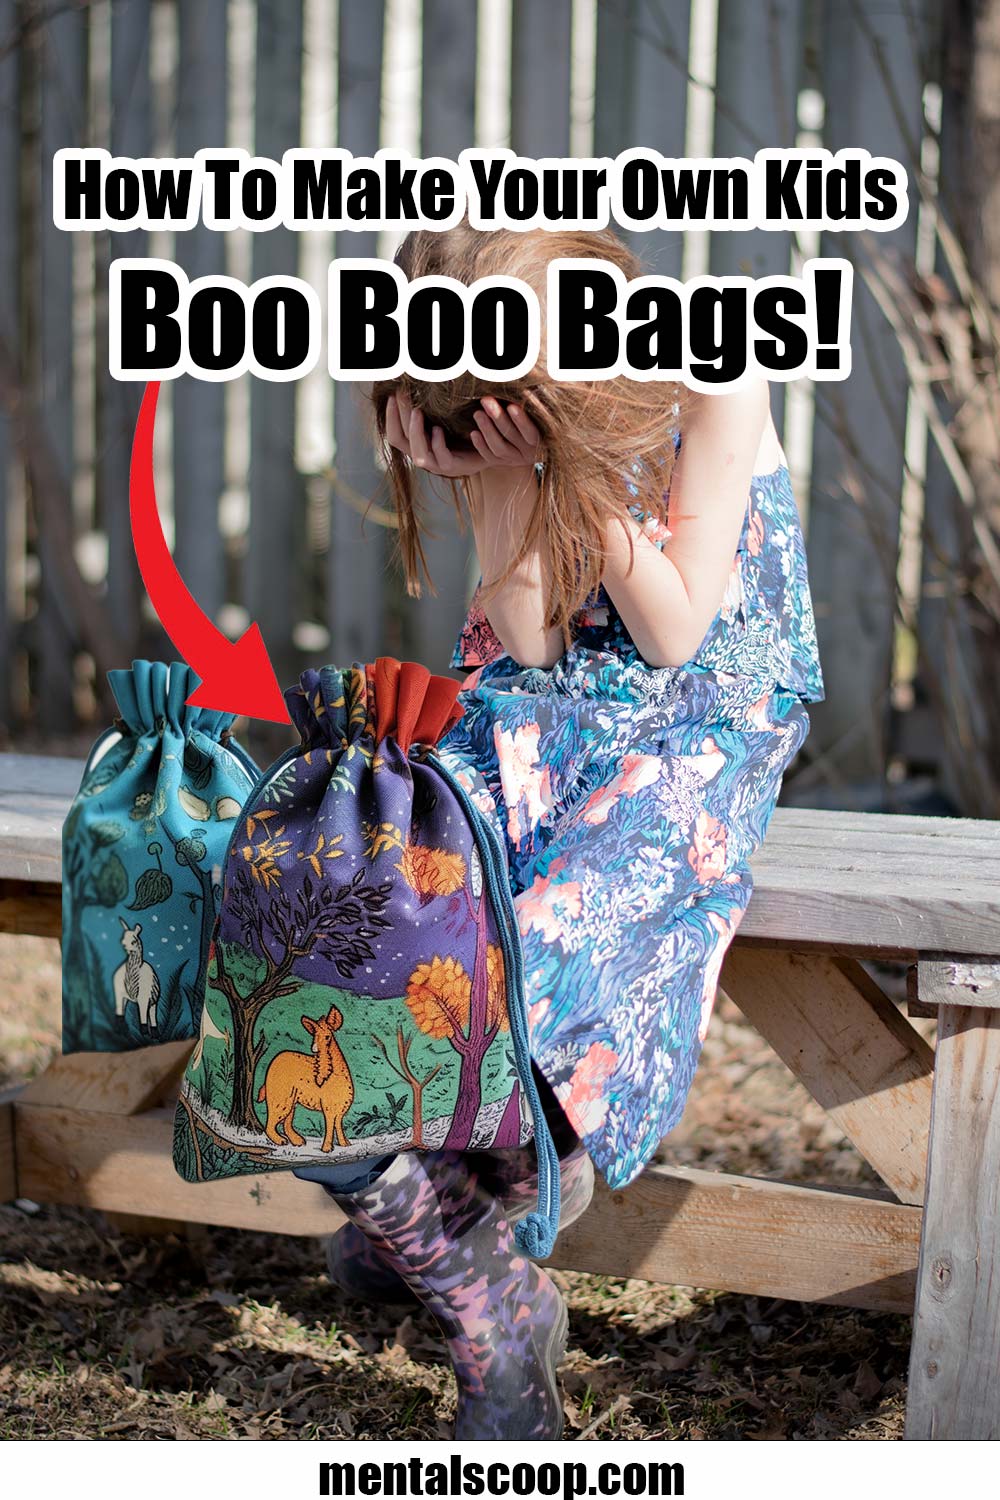 How To Make Your Own Boo Boo Bags! - Mental Scoop